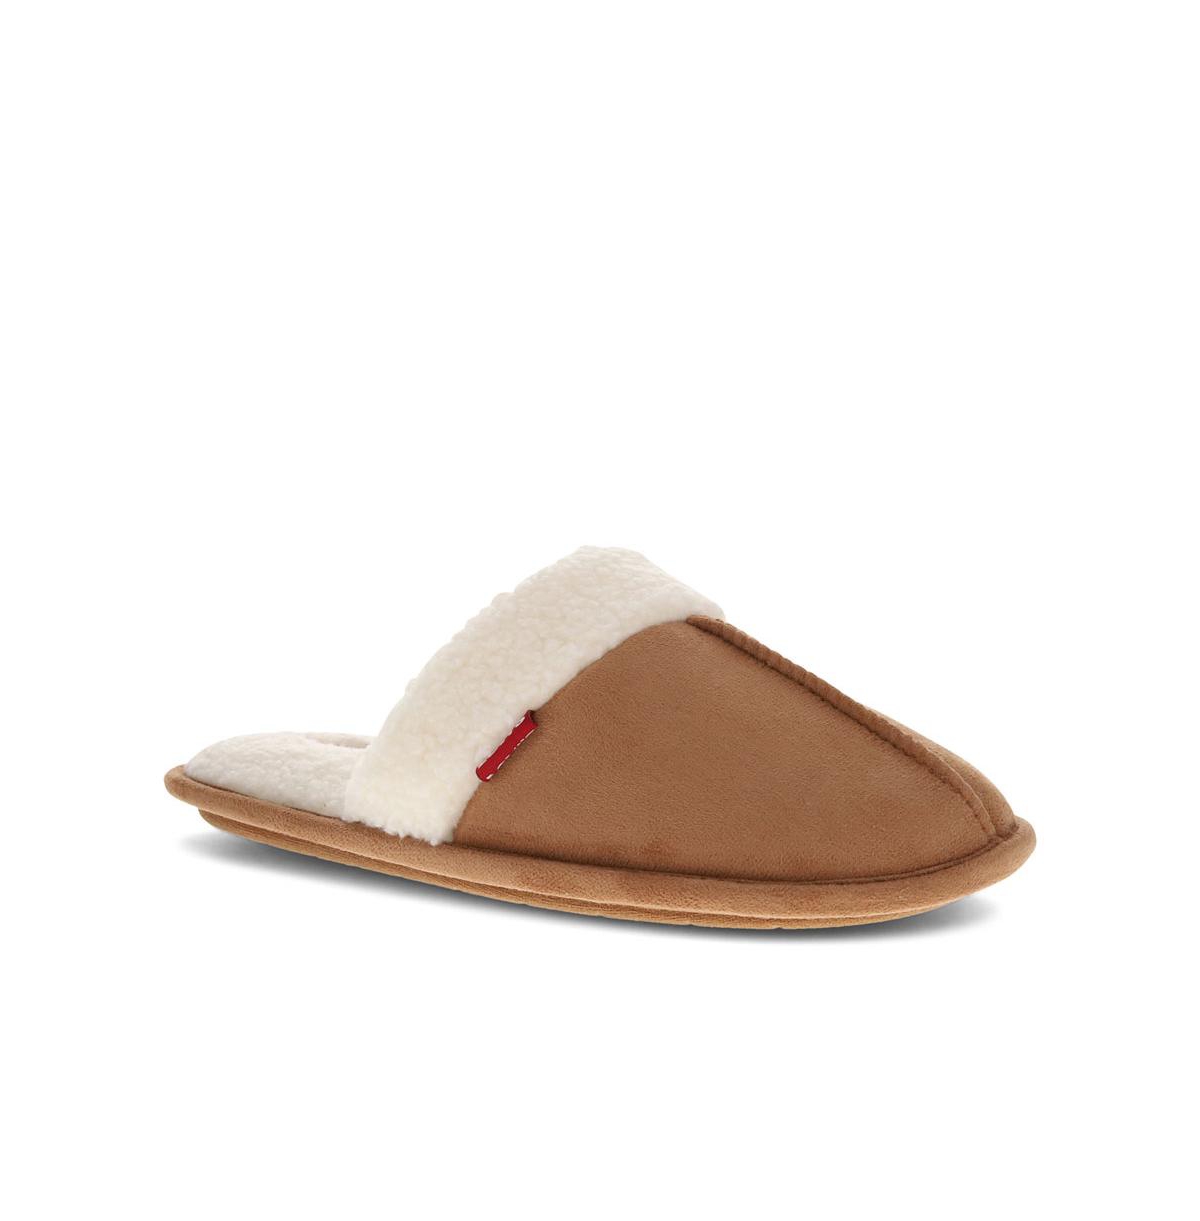 LEVI'S WOMEN'S TALYA MICRO SUEDE SCUFF HOUSE SHOE SLIPPERS